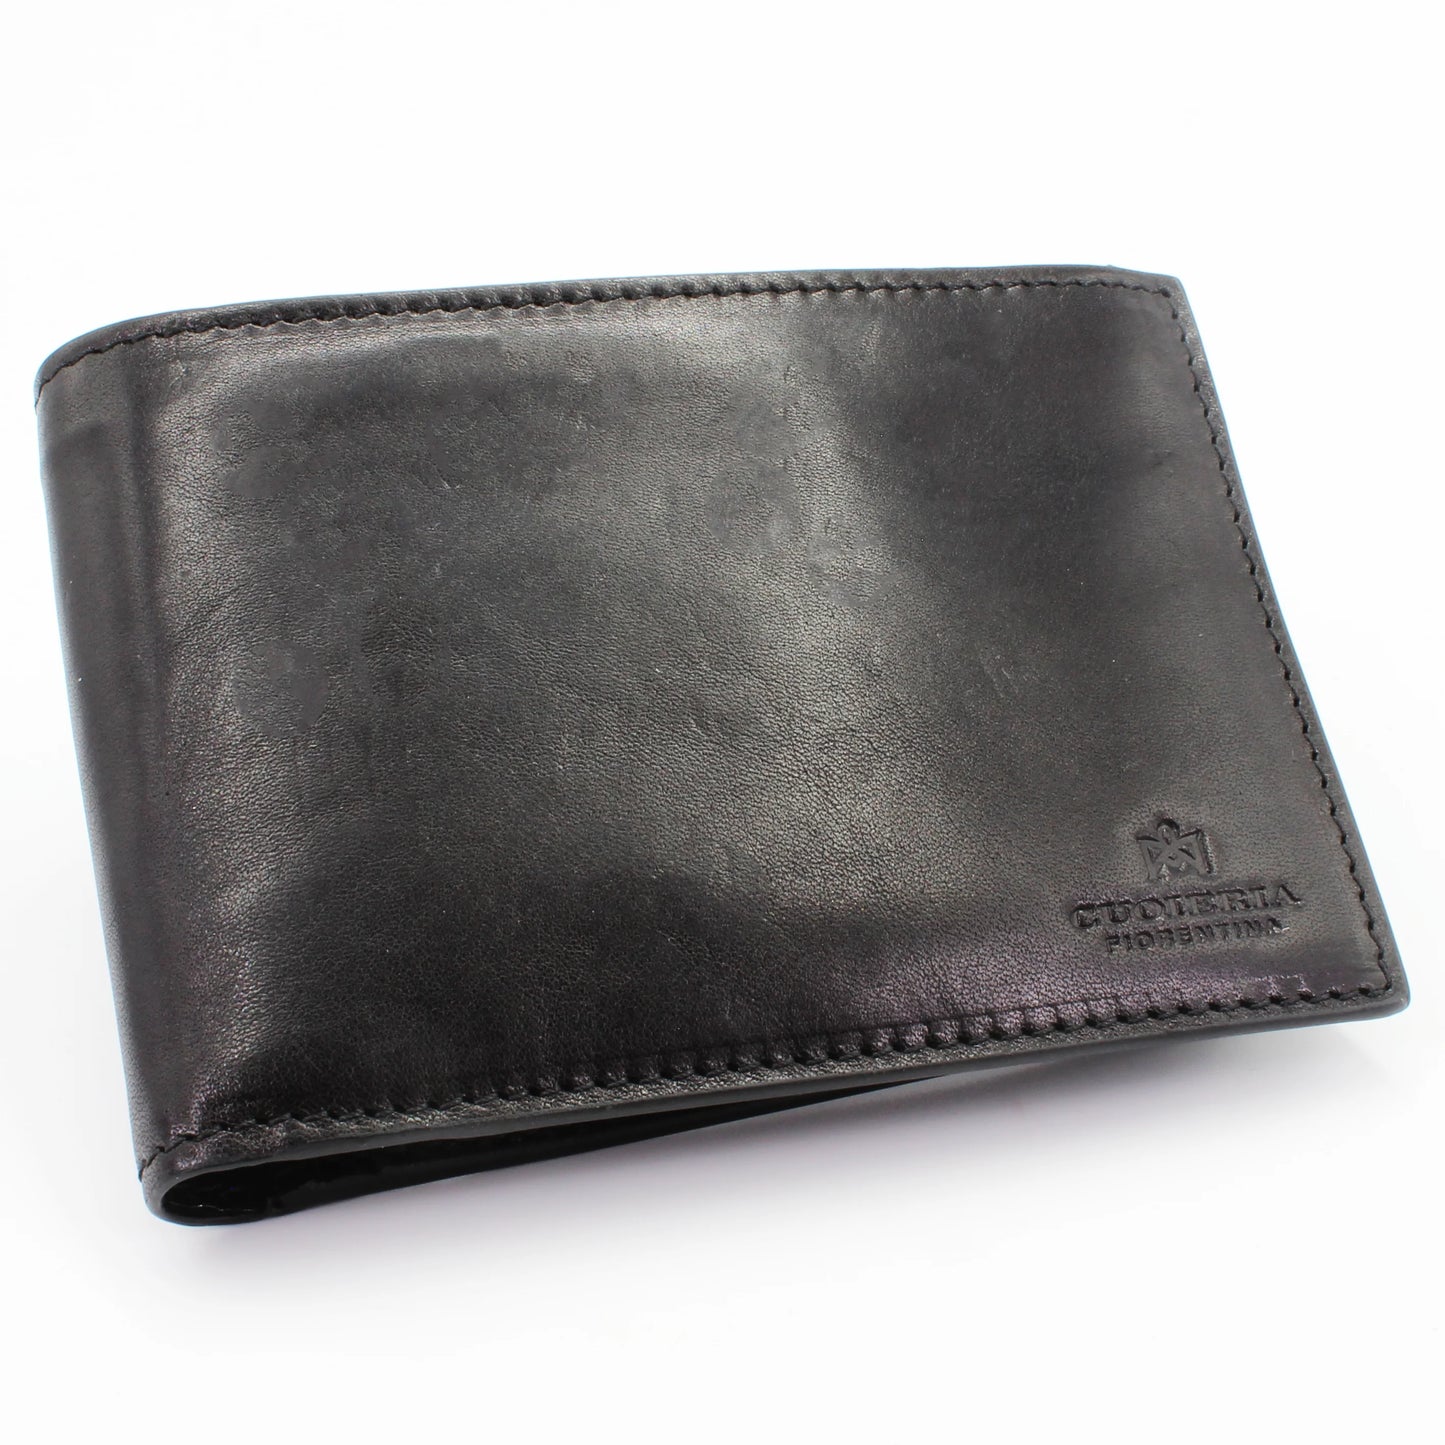 Shop our Italian-made Cuoieria Fiorentina Italian leather wallet in nero (PU00000906735) or browse our range of Italian wallets and purses for men & women in-store at Aliverti Cape Town, or shop online.   We deliver in South Africa & offer multiple payment plans as well as accept multiple safe & secure payment methods.